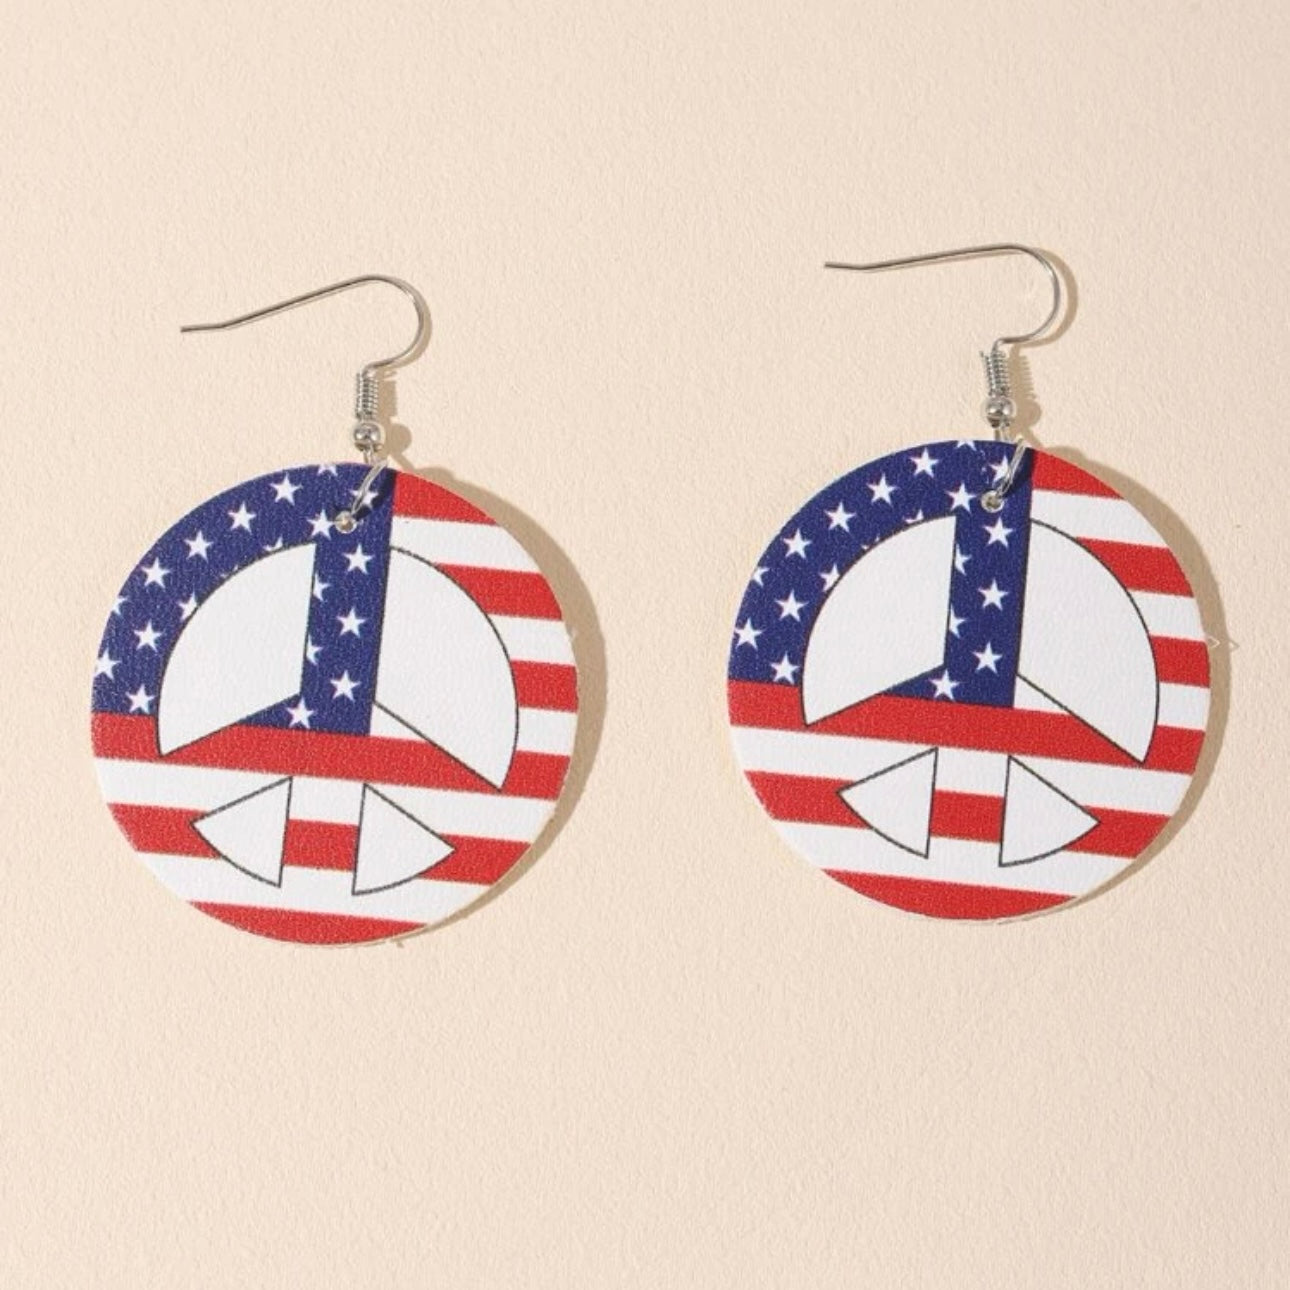 Patriotic Red, White & Blue Earring Bundle - Set of 4, Fourth of July, Stars & Stripes, SALE